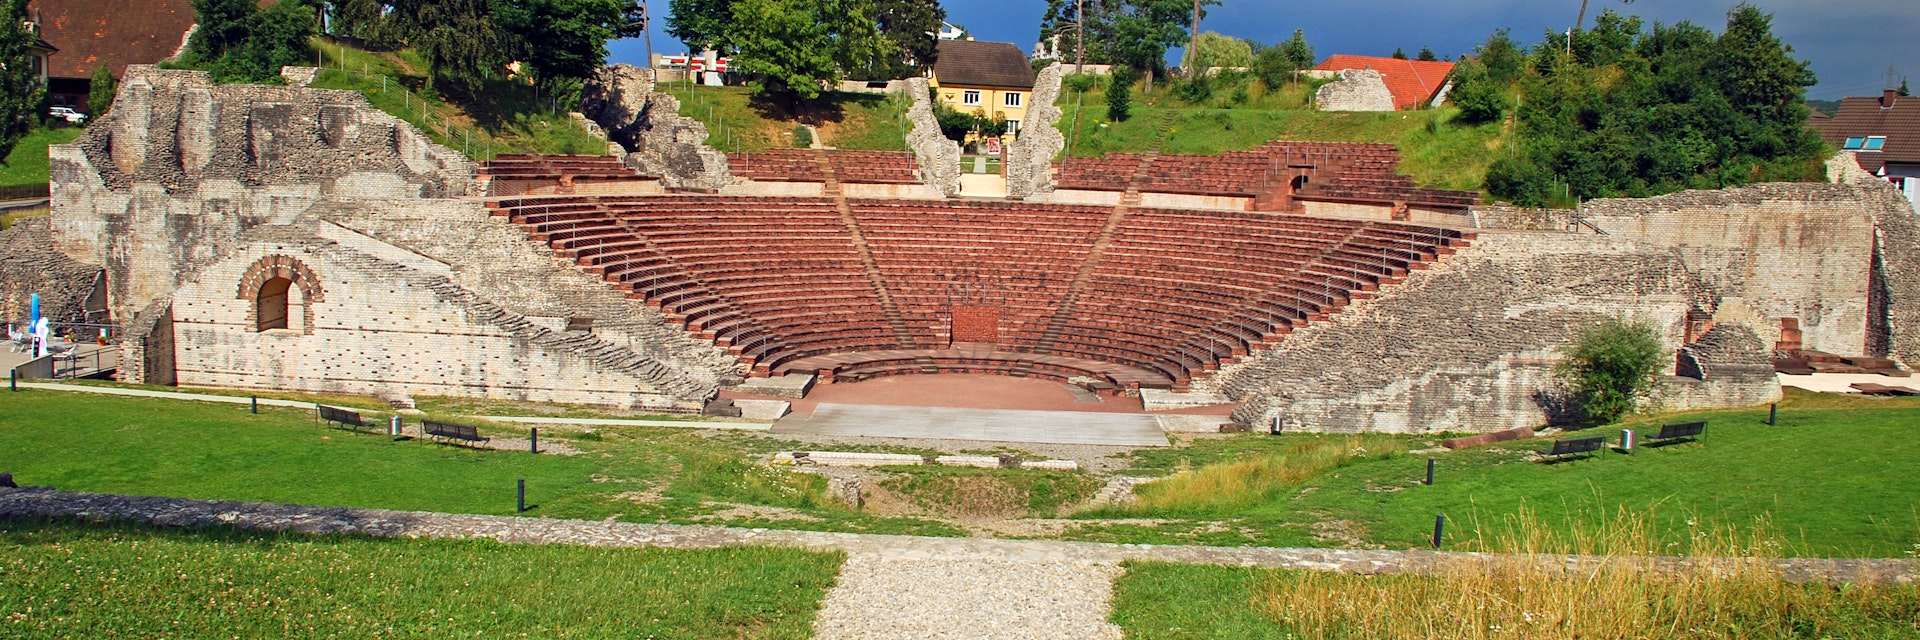 Augusta Raurica, a Roman archaeological site and an open-air museum in Switzerland.